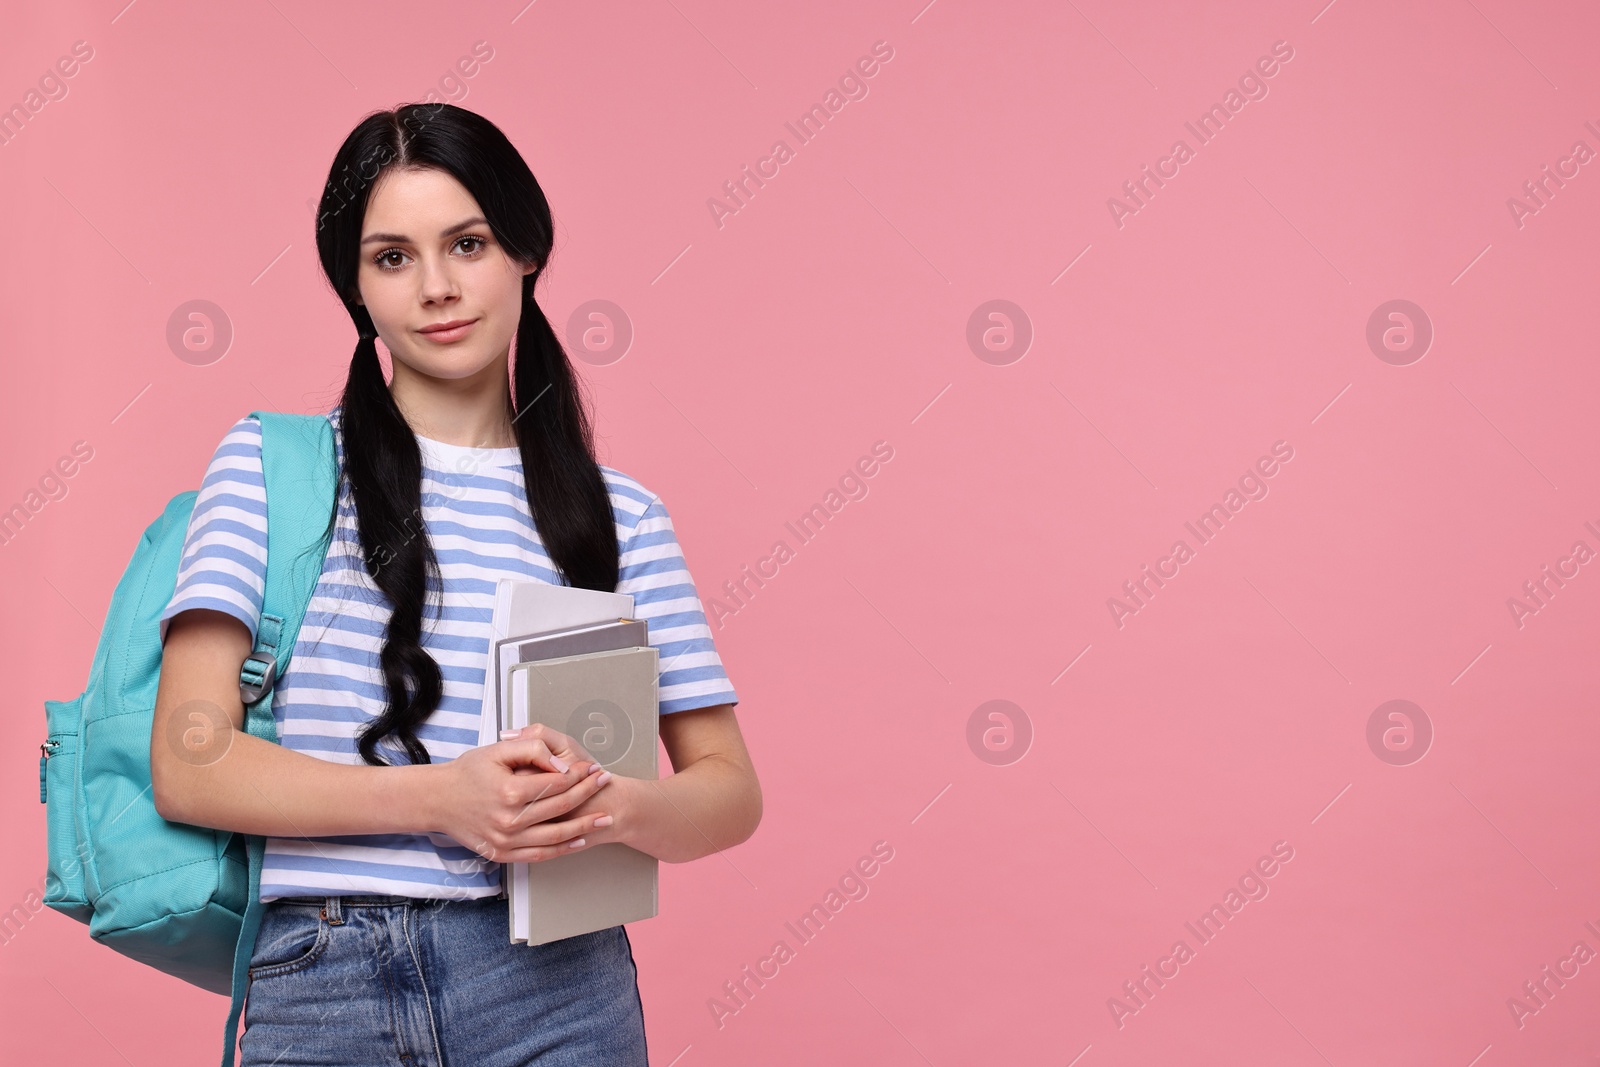 Photo of Student with books and backpack on pink background. Space for text